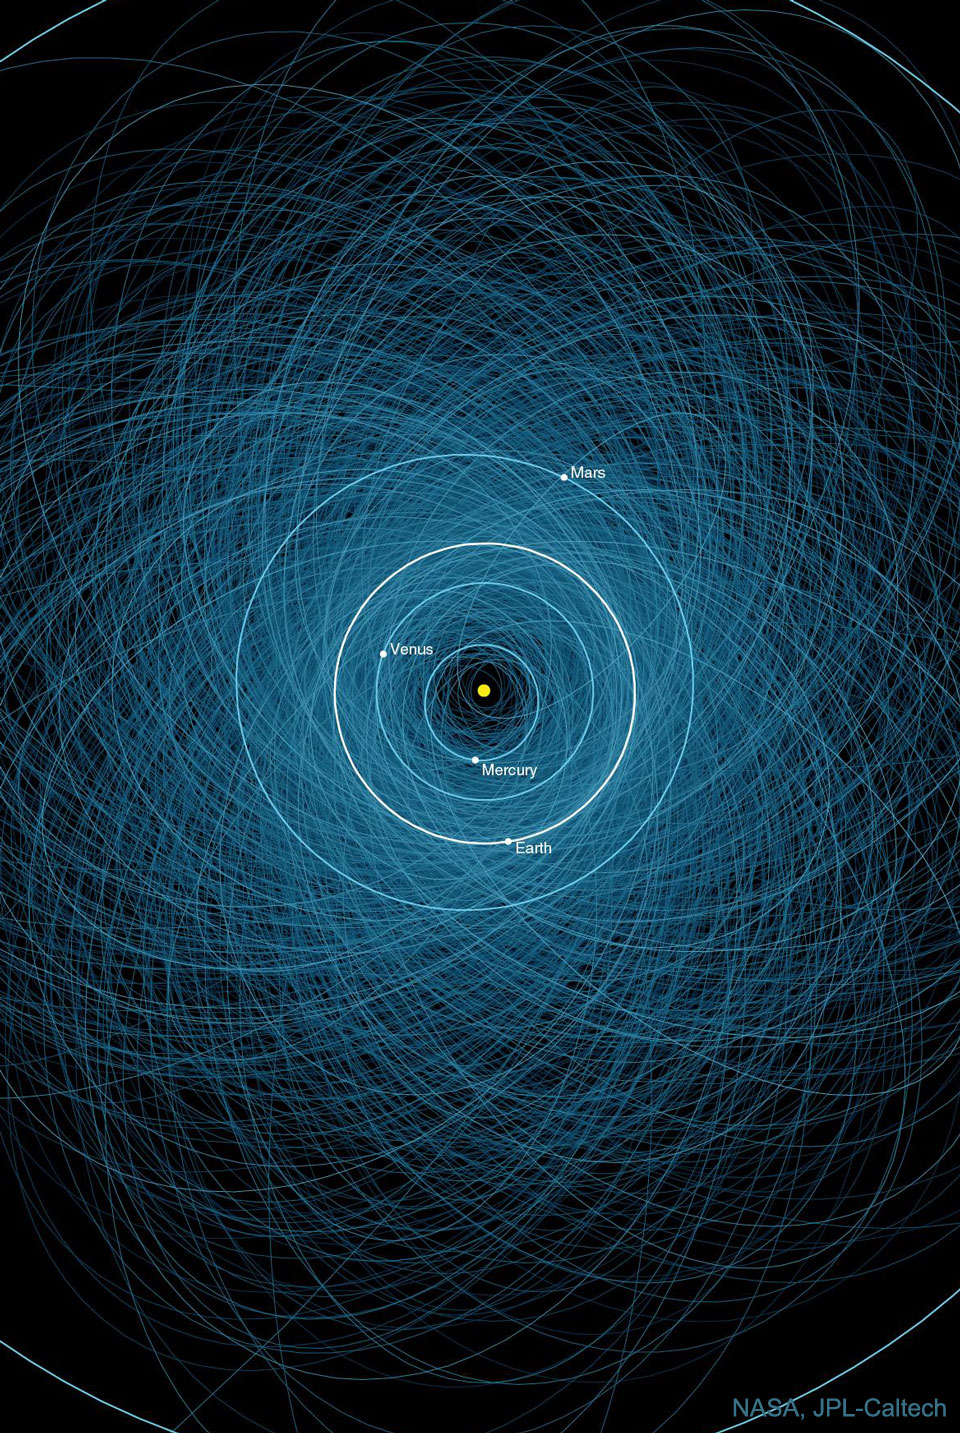 The picture is an illustration of the orbits of 
potentially hazardous asteroids that may, one day in the distant future, 
strike the Earth.
Please see the explanation for more detailed information.